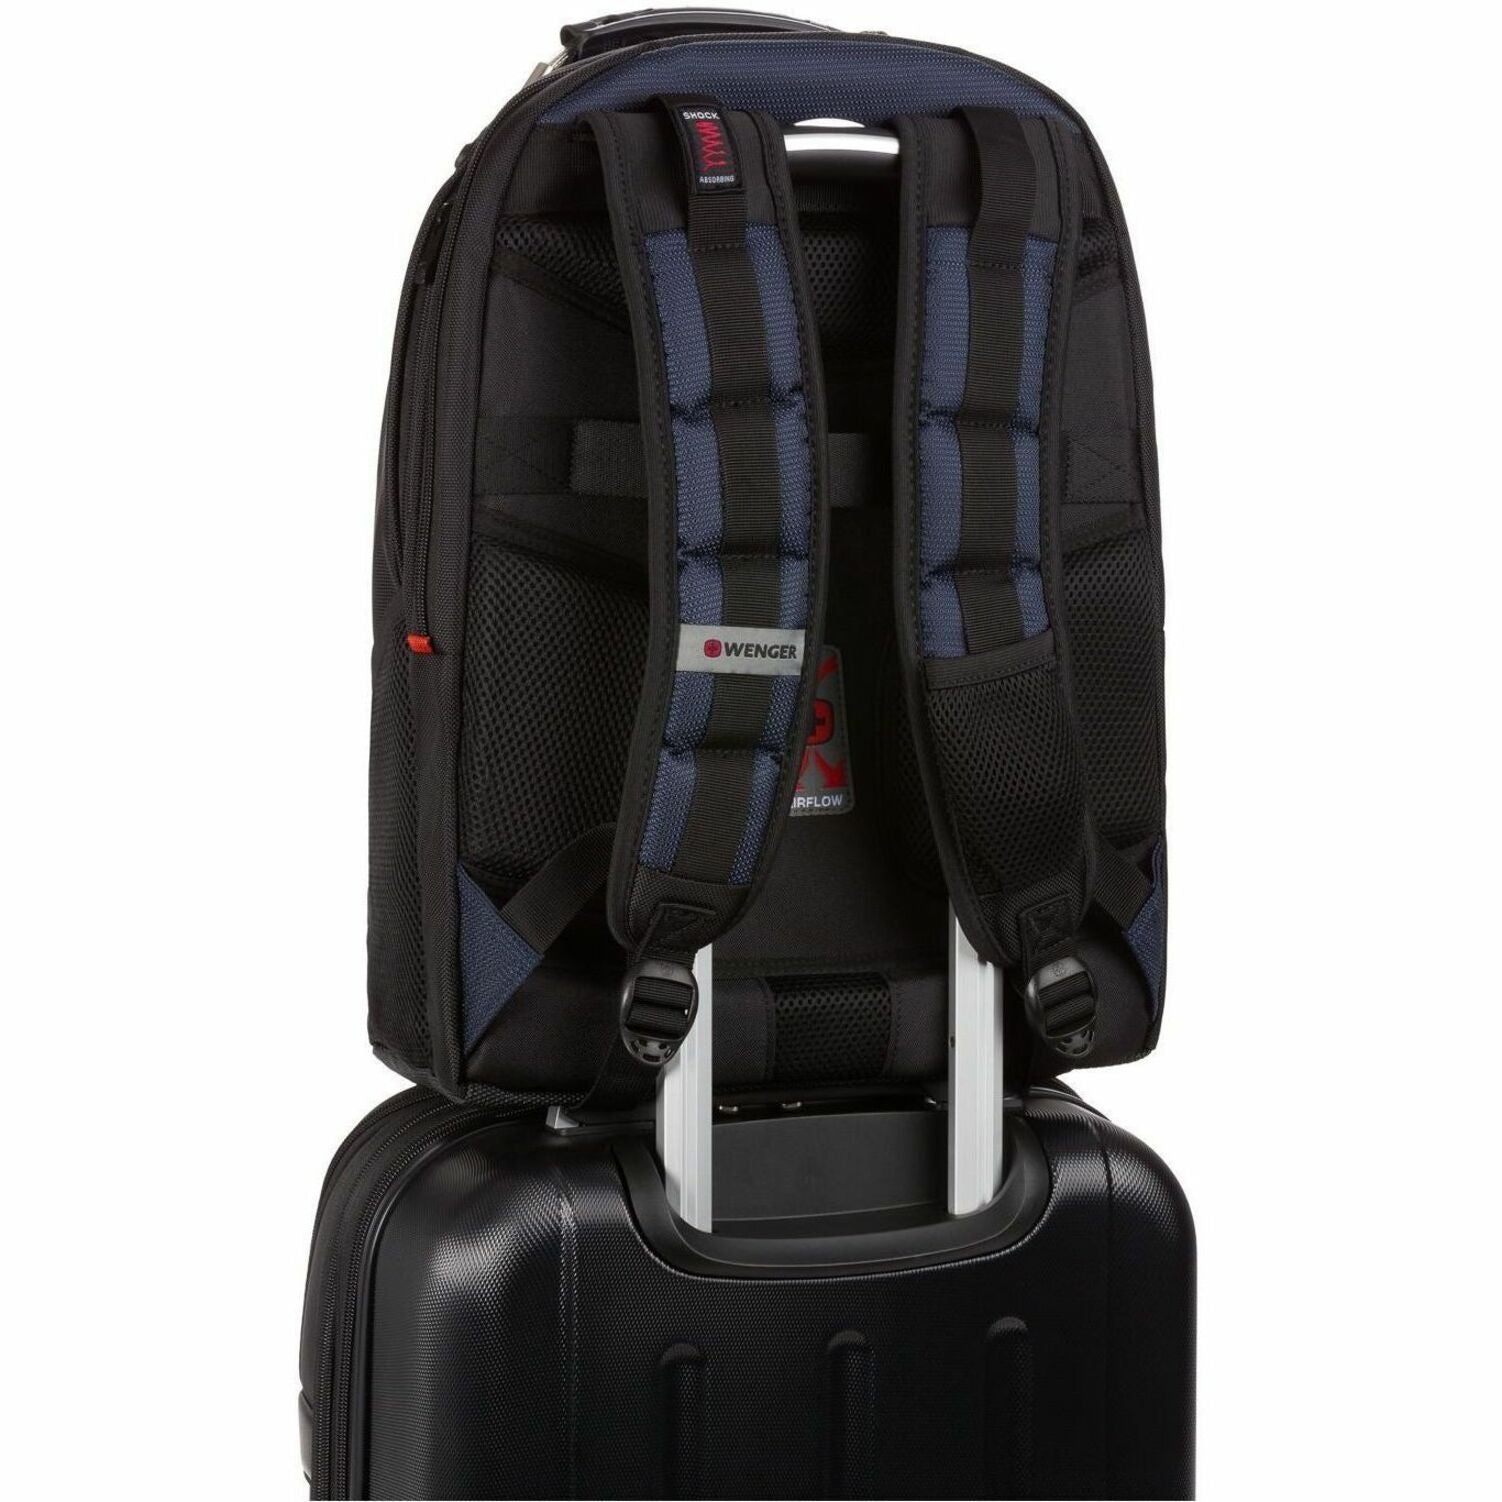 SwissGear 610264 Ibex Pro 16 inch Laptop Backpack, Blue/Black, Fits up to a 16" Laptop